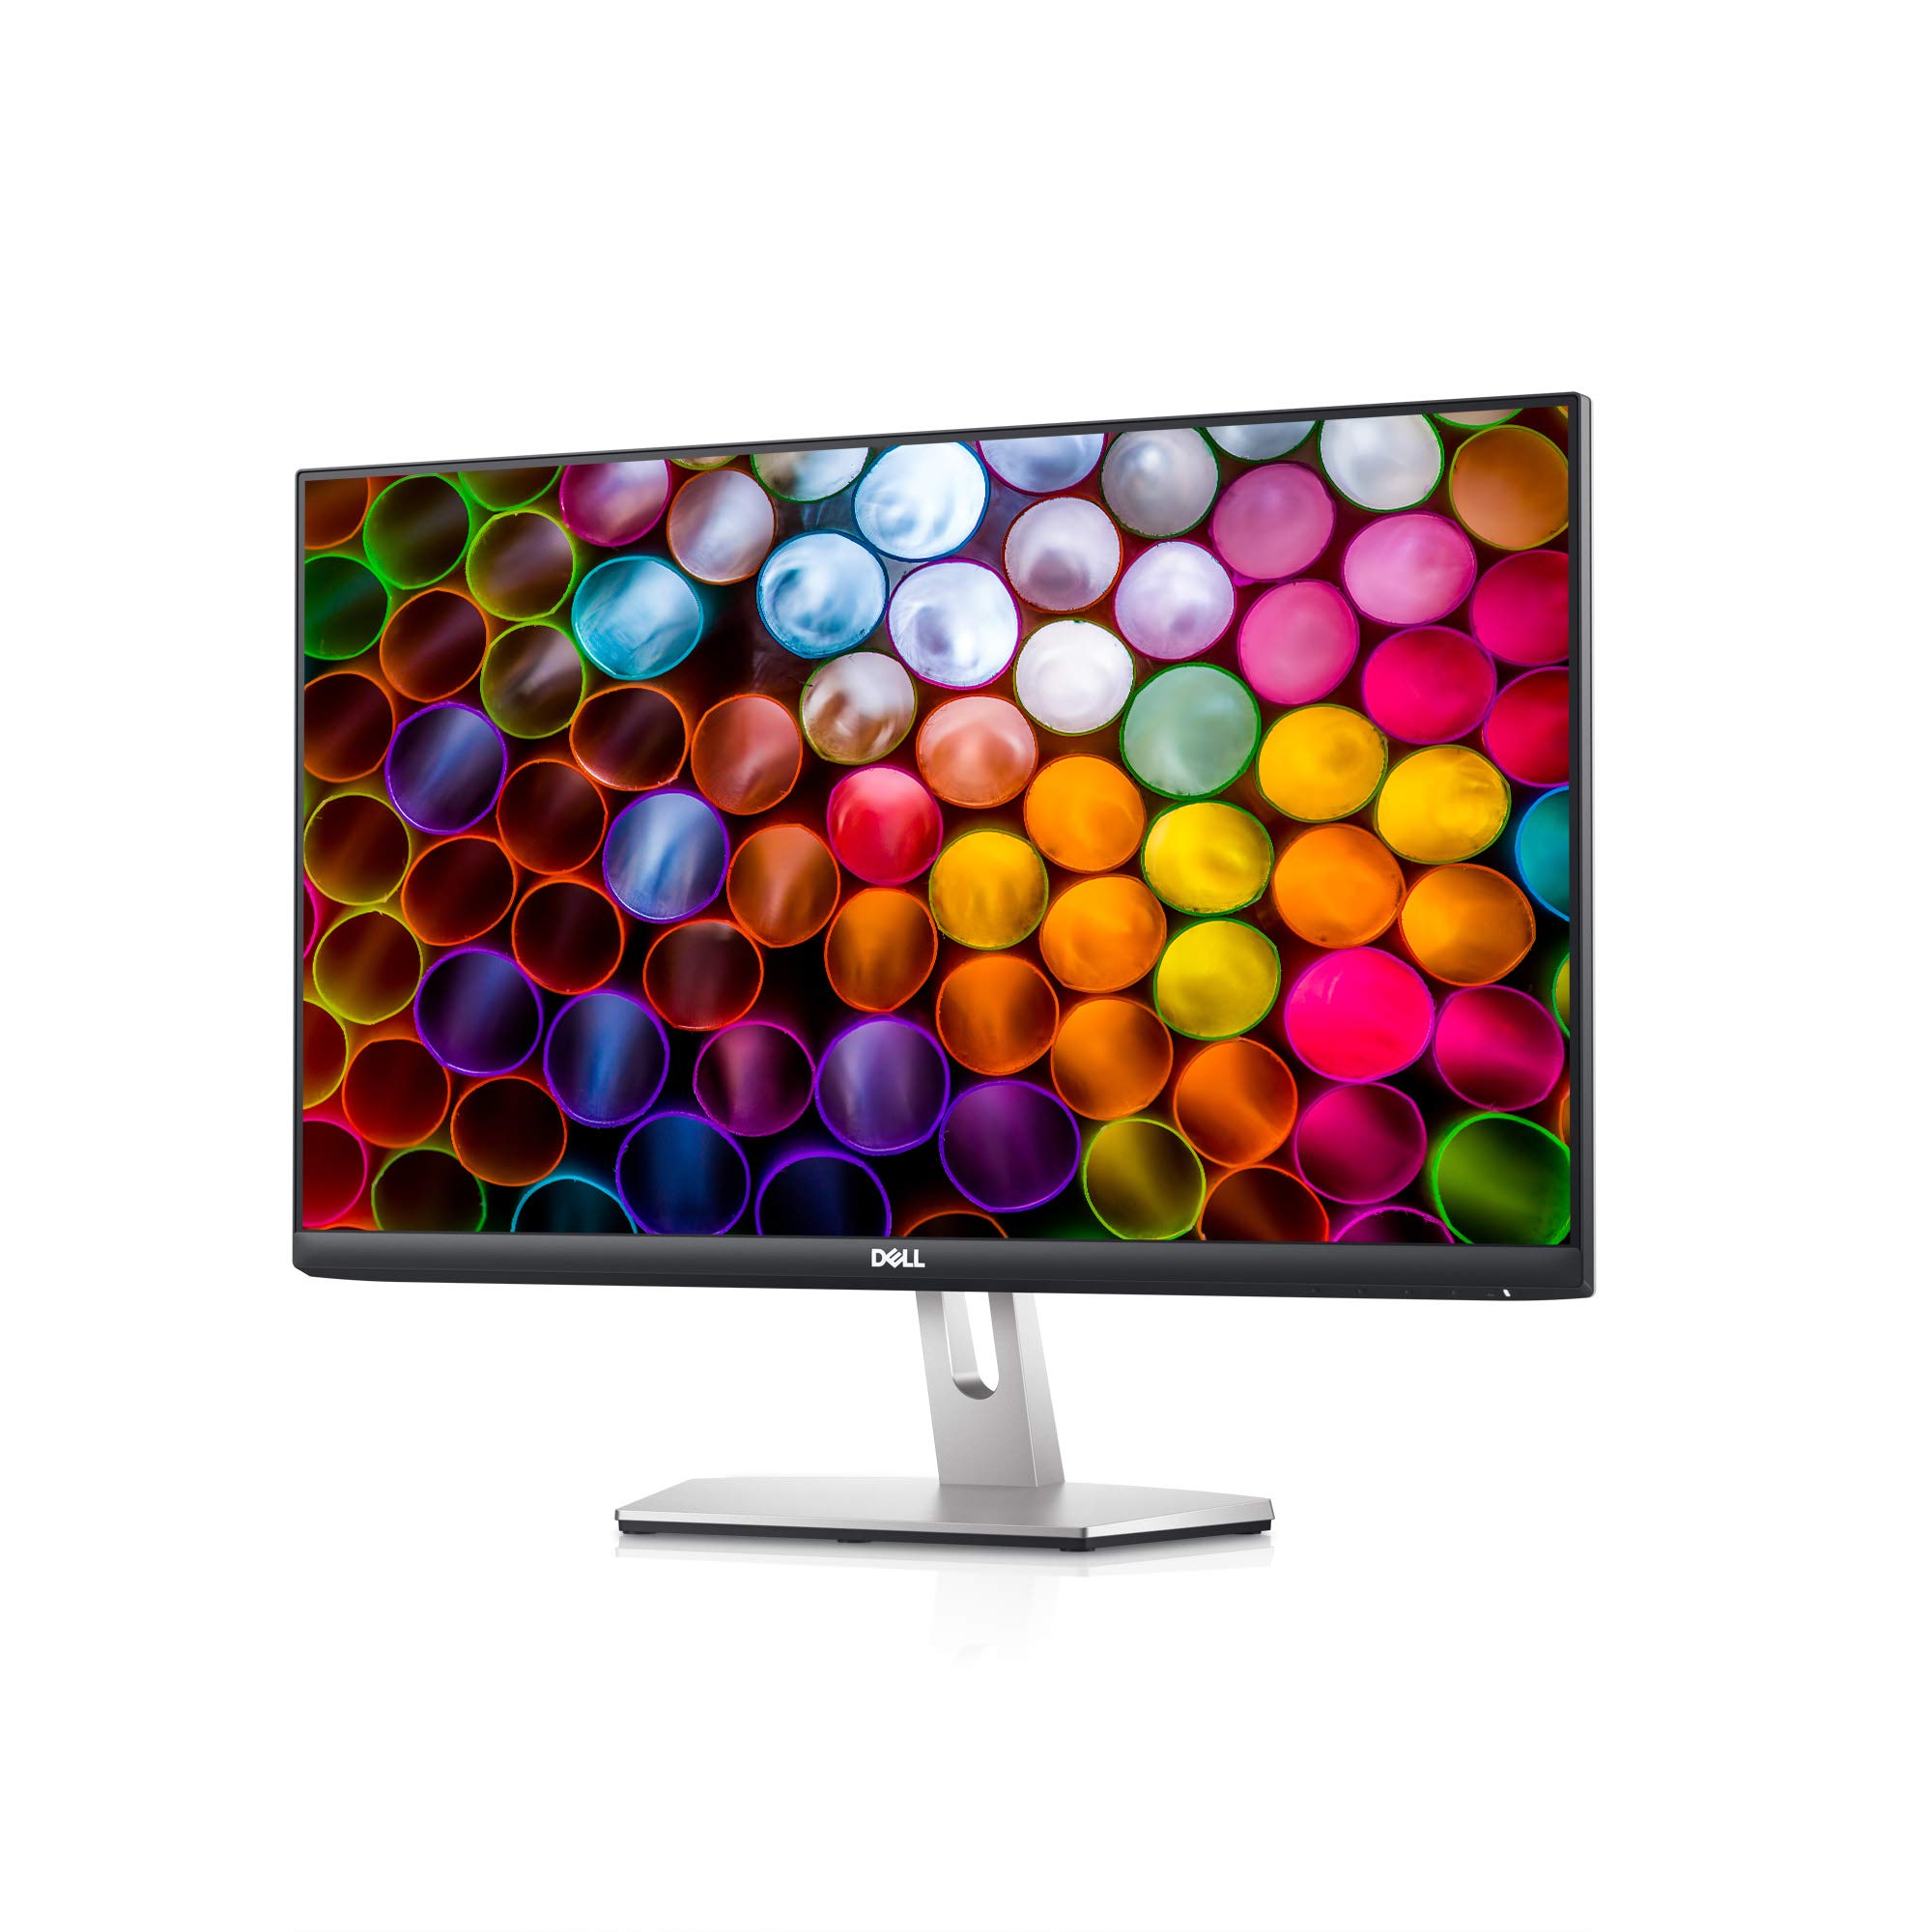 Dell S2421HS Full HD 1920 x 1080, 24-Inch 1080p LED, 75Hz, Desktop Monitor with Adjustable Stand, 4ms Grey-to-Grey Response Time, AMD FreeSync, IPS Technology, HDMI, DisplayPort, Silver